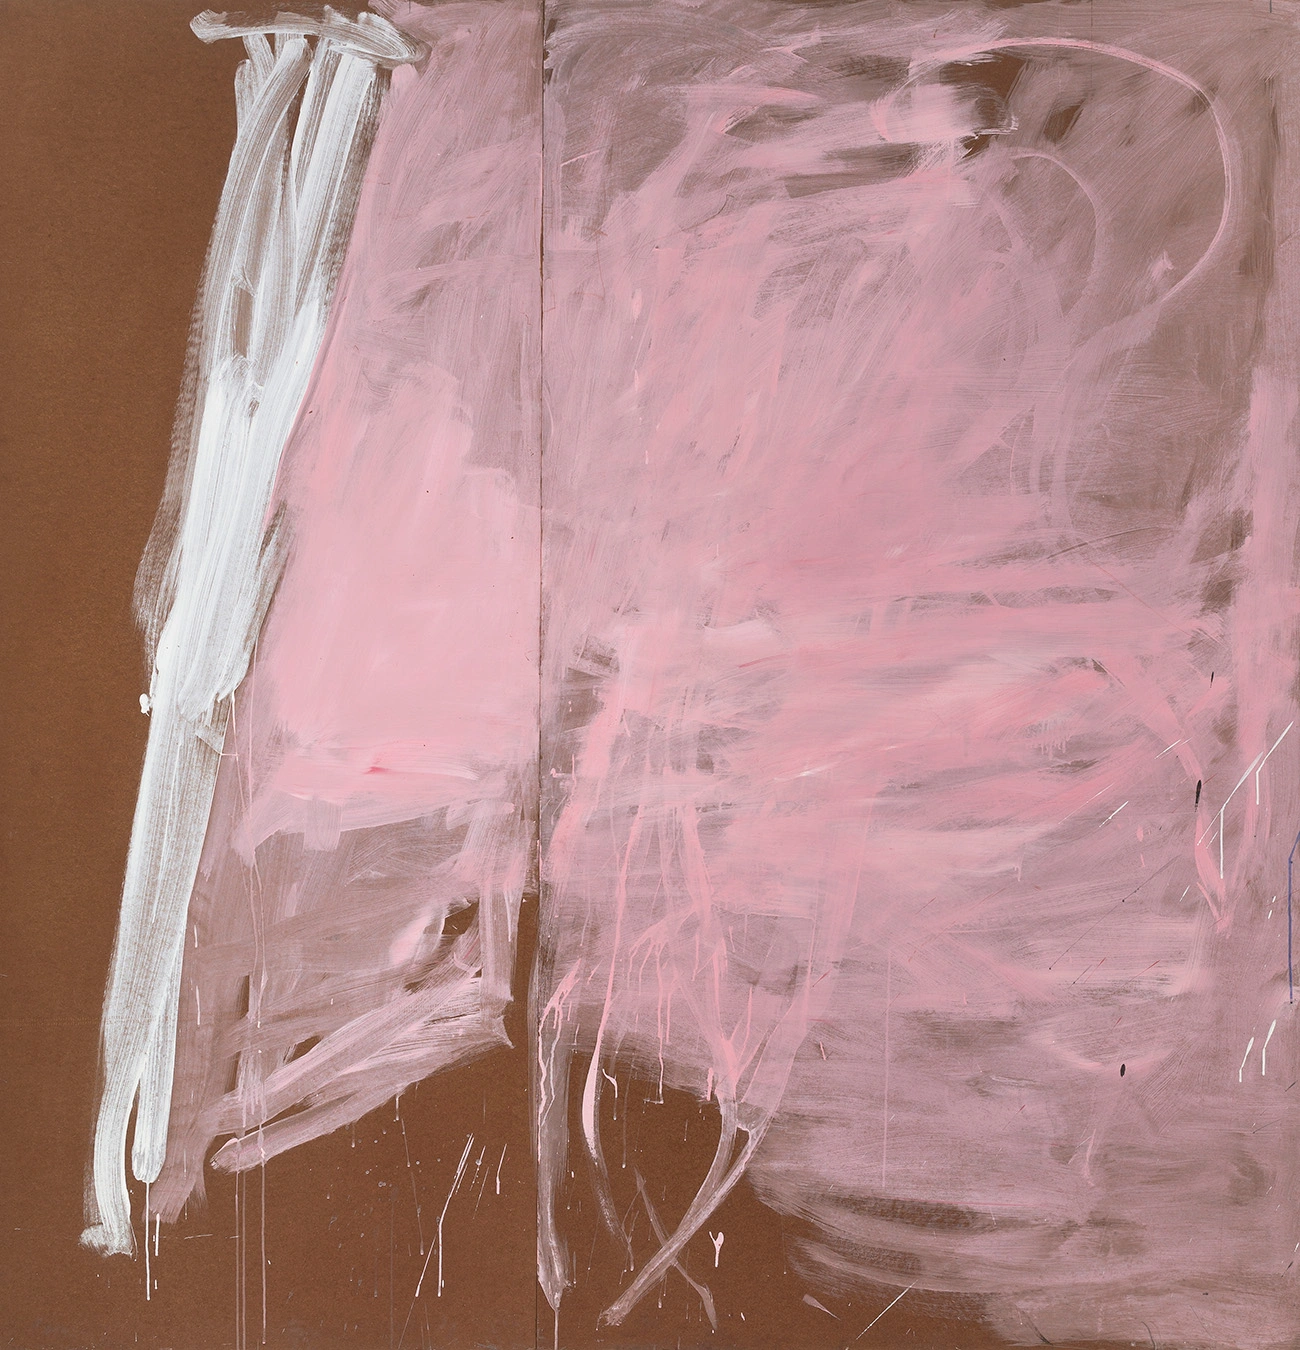 Pink and White Line, 1970, TP70 (courtesy of the Andrew Collection).